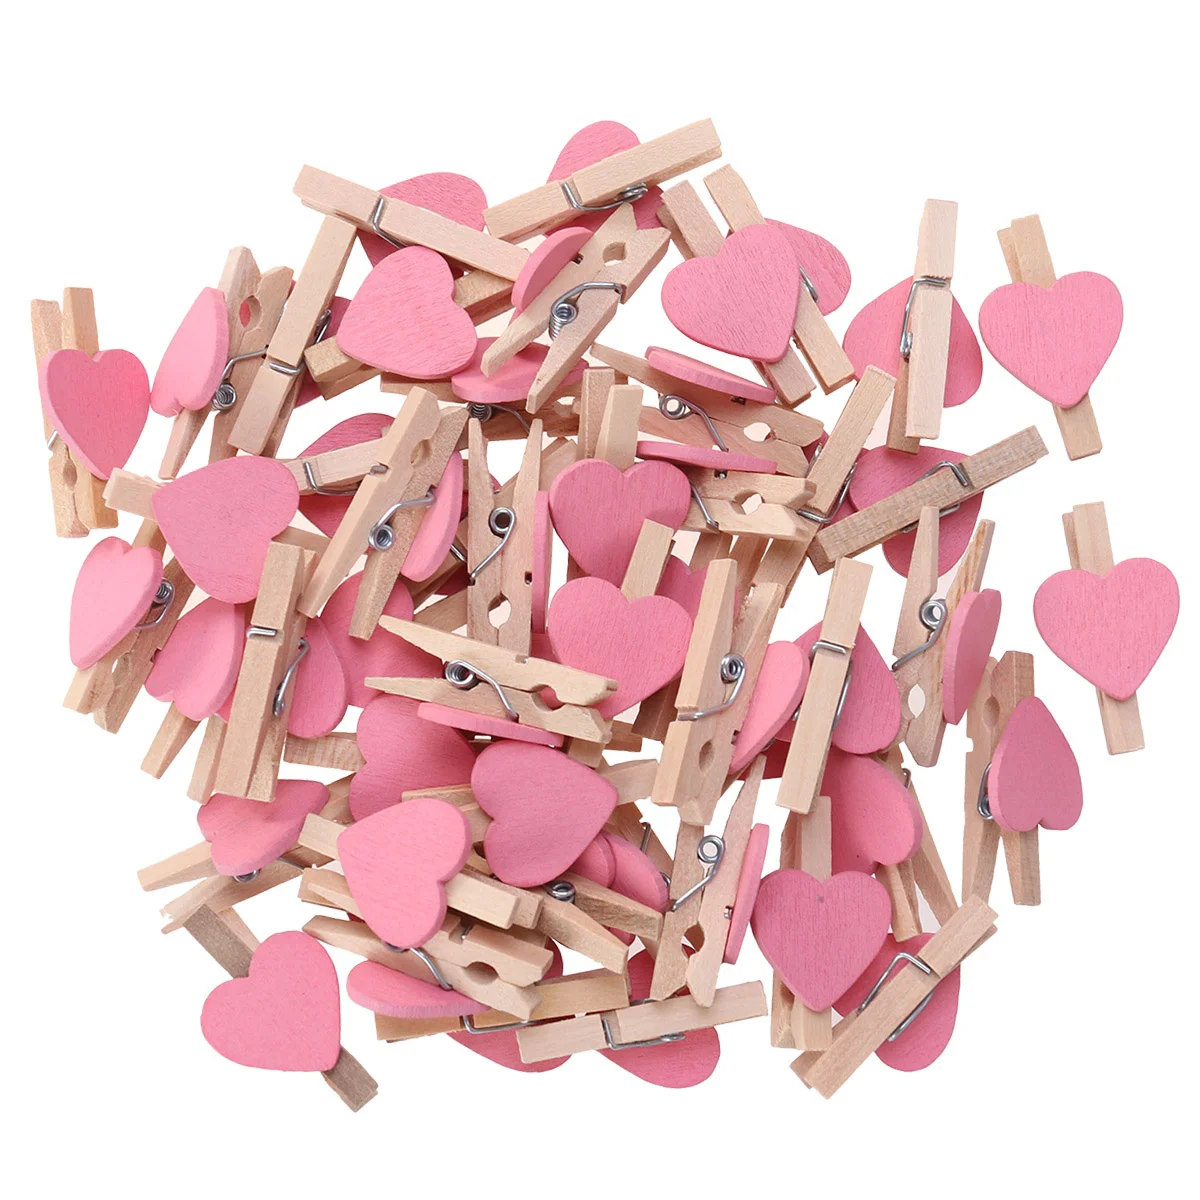 

50pcs clothes Heart- Shaped Wooden Clothespin Craft Photo Clips Photo Paper Pegs for Scrapbooking Wood Crafts Wedding